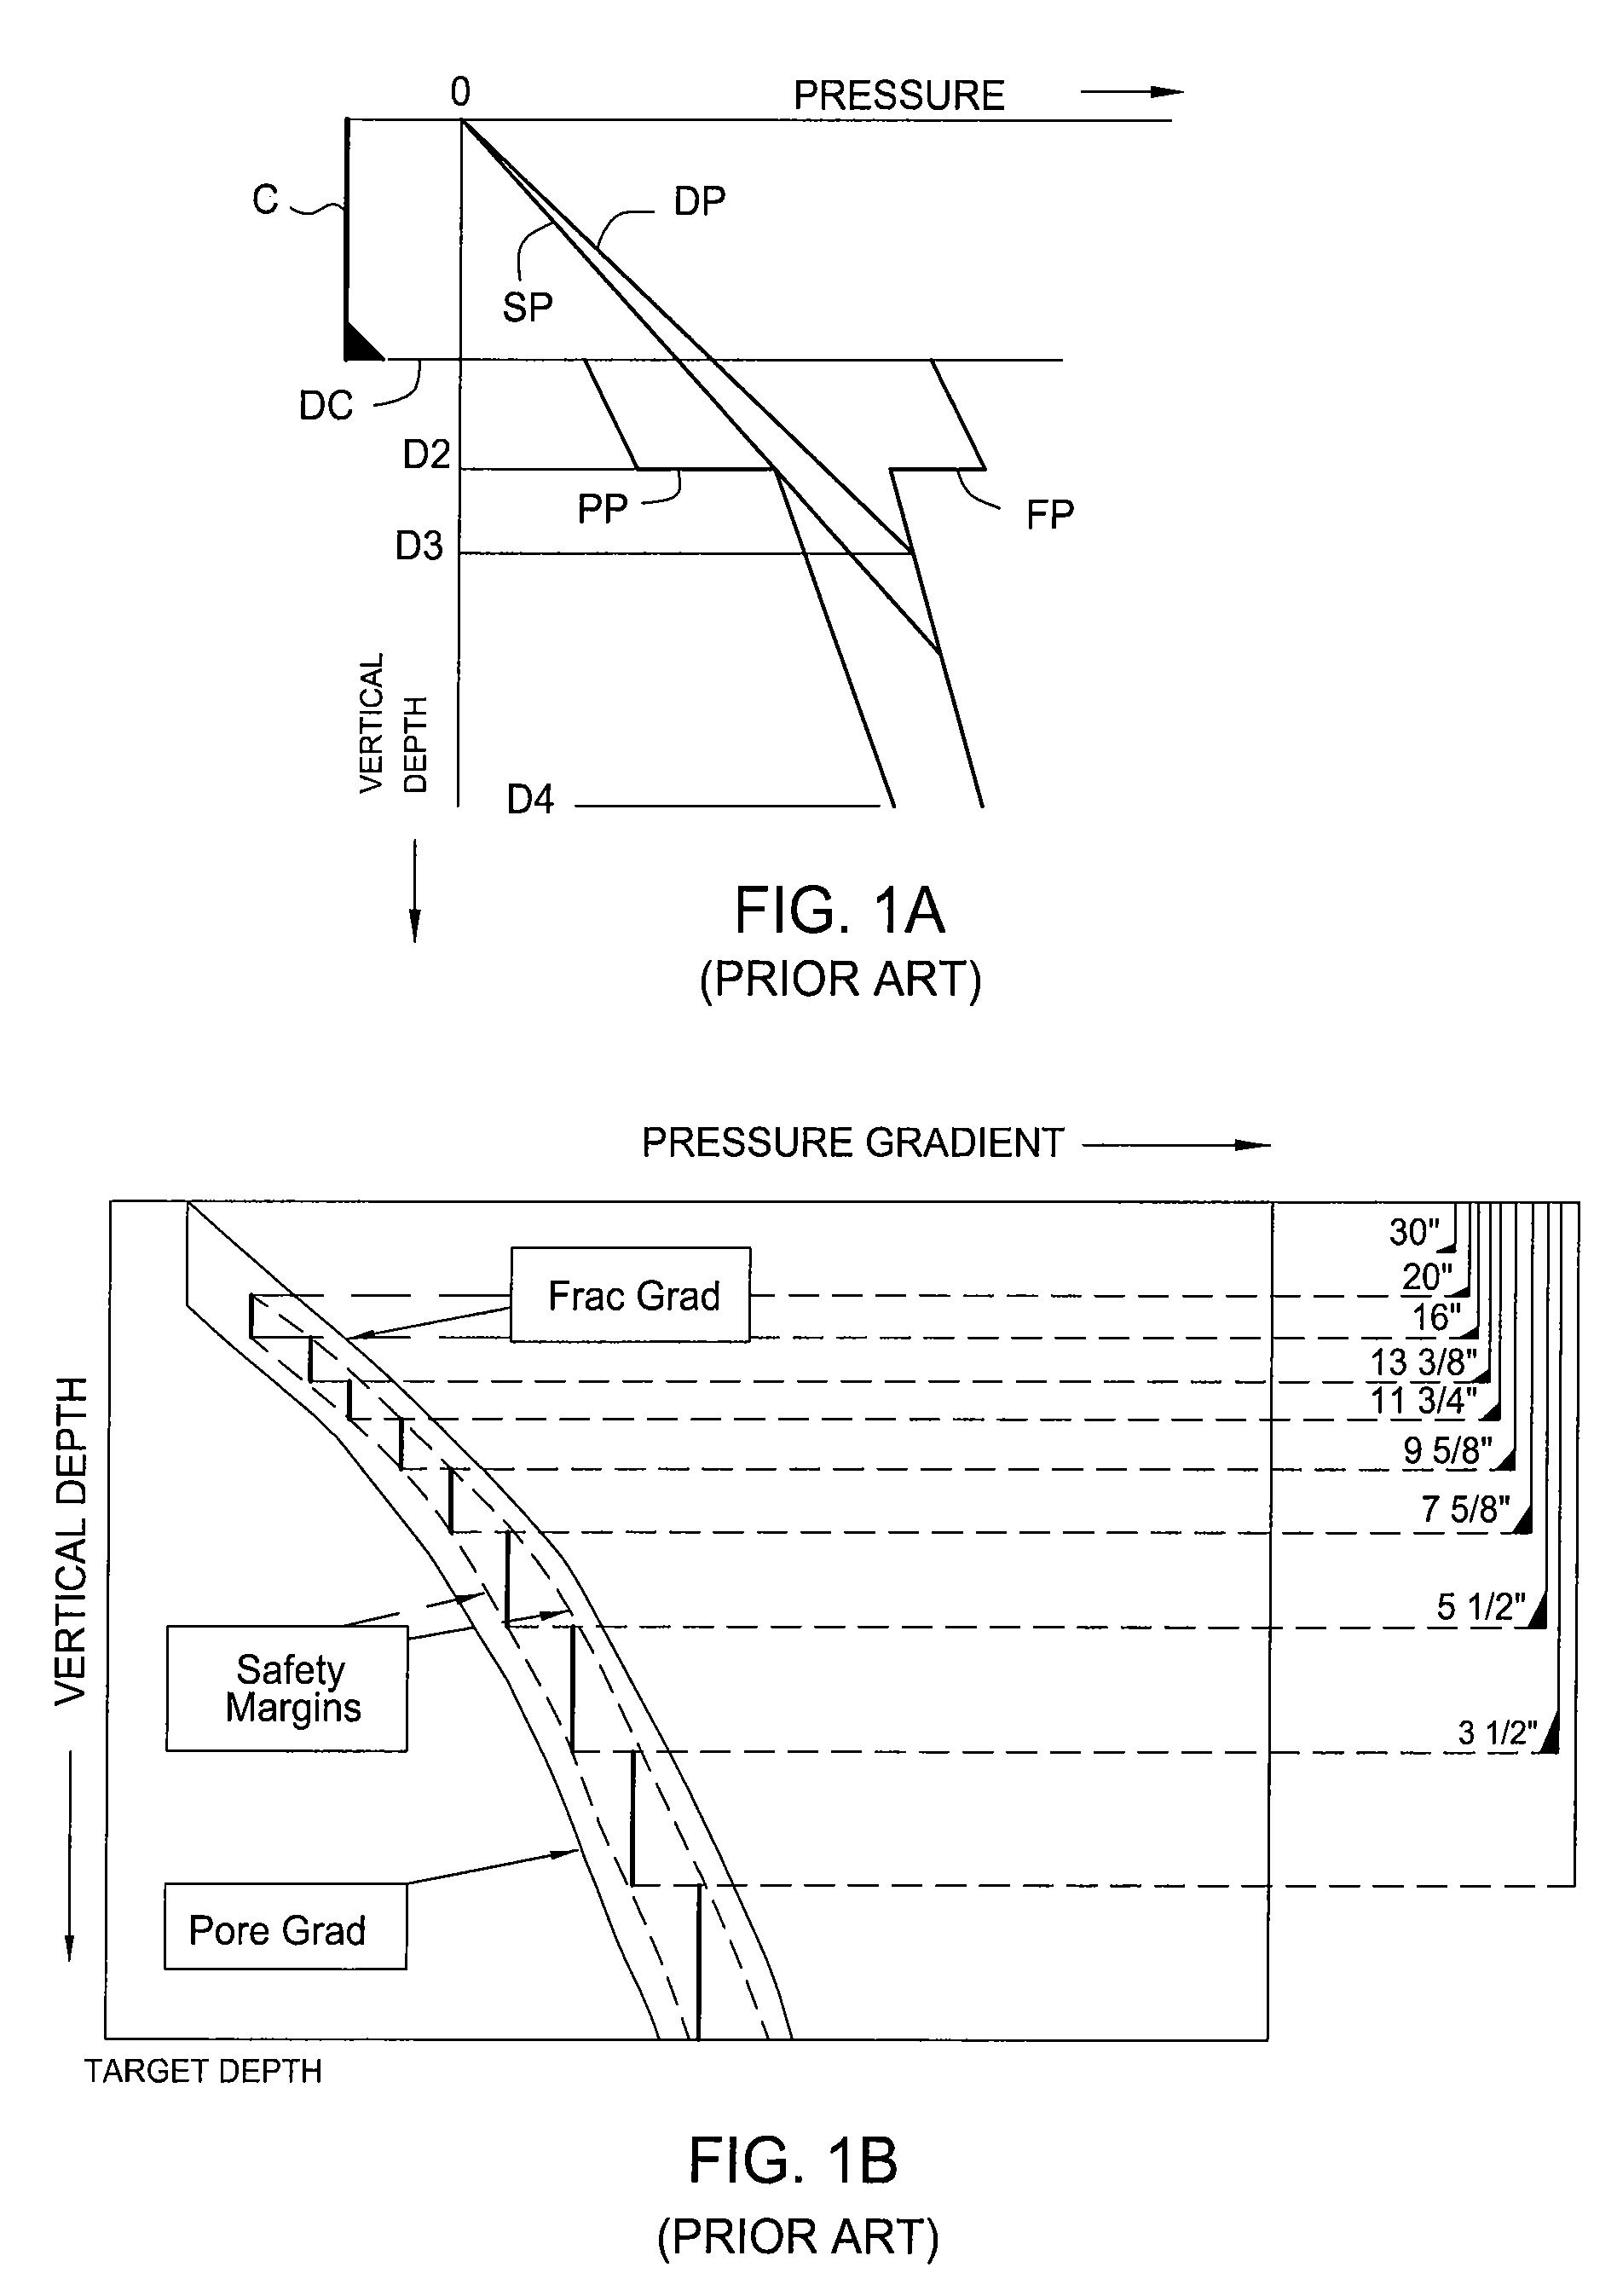 Annulus pressure control drilling systems and methods